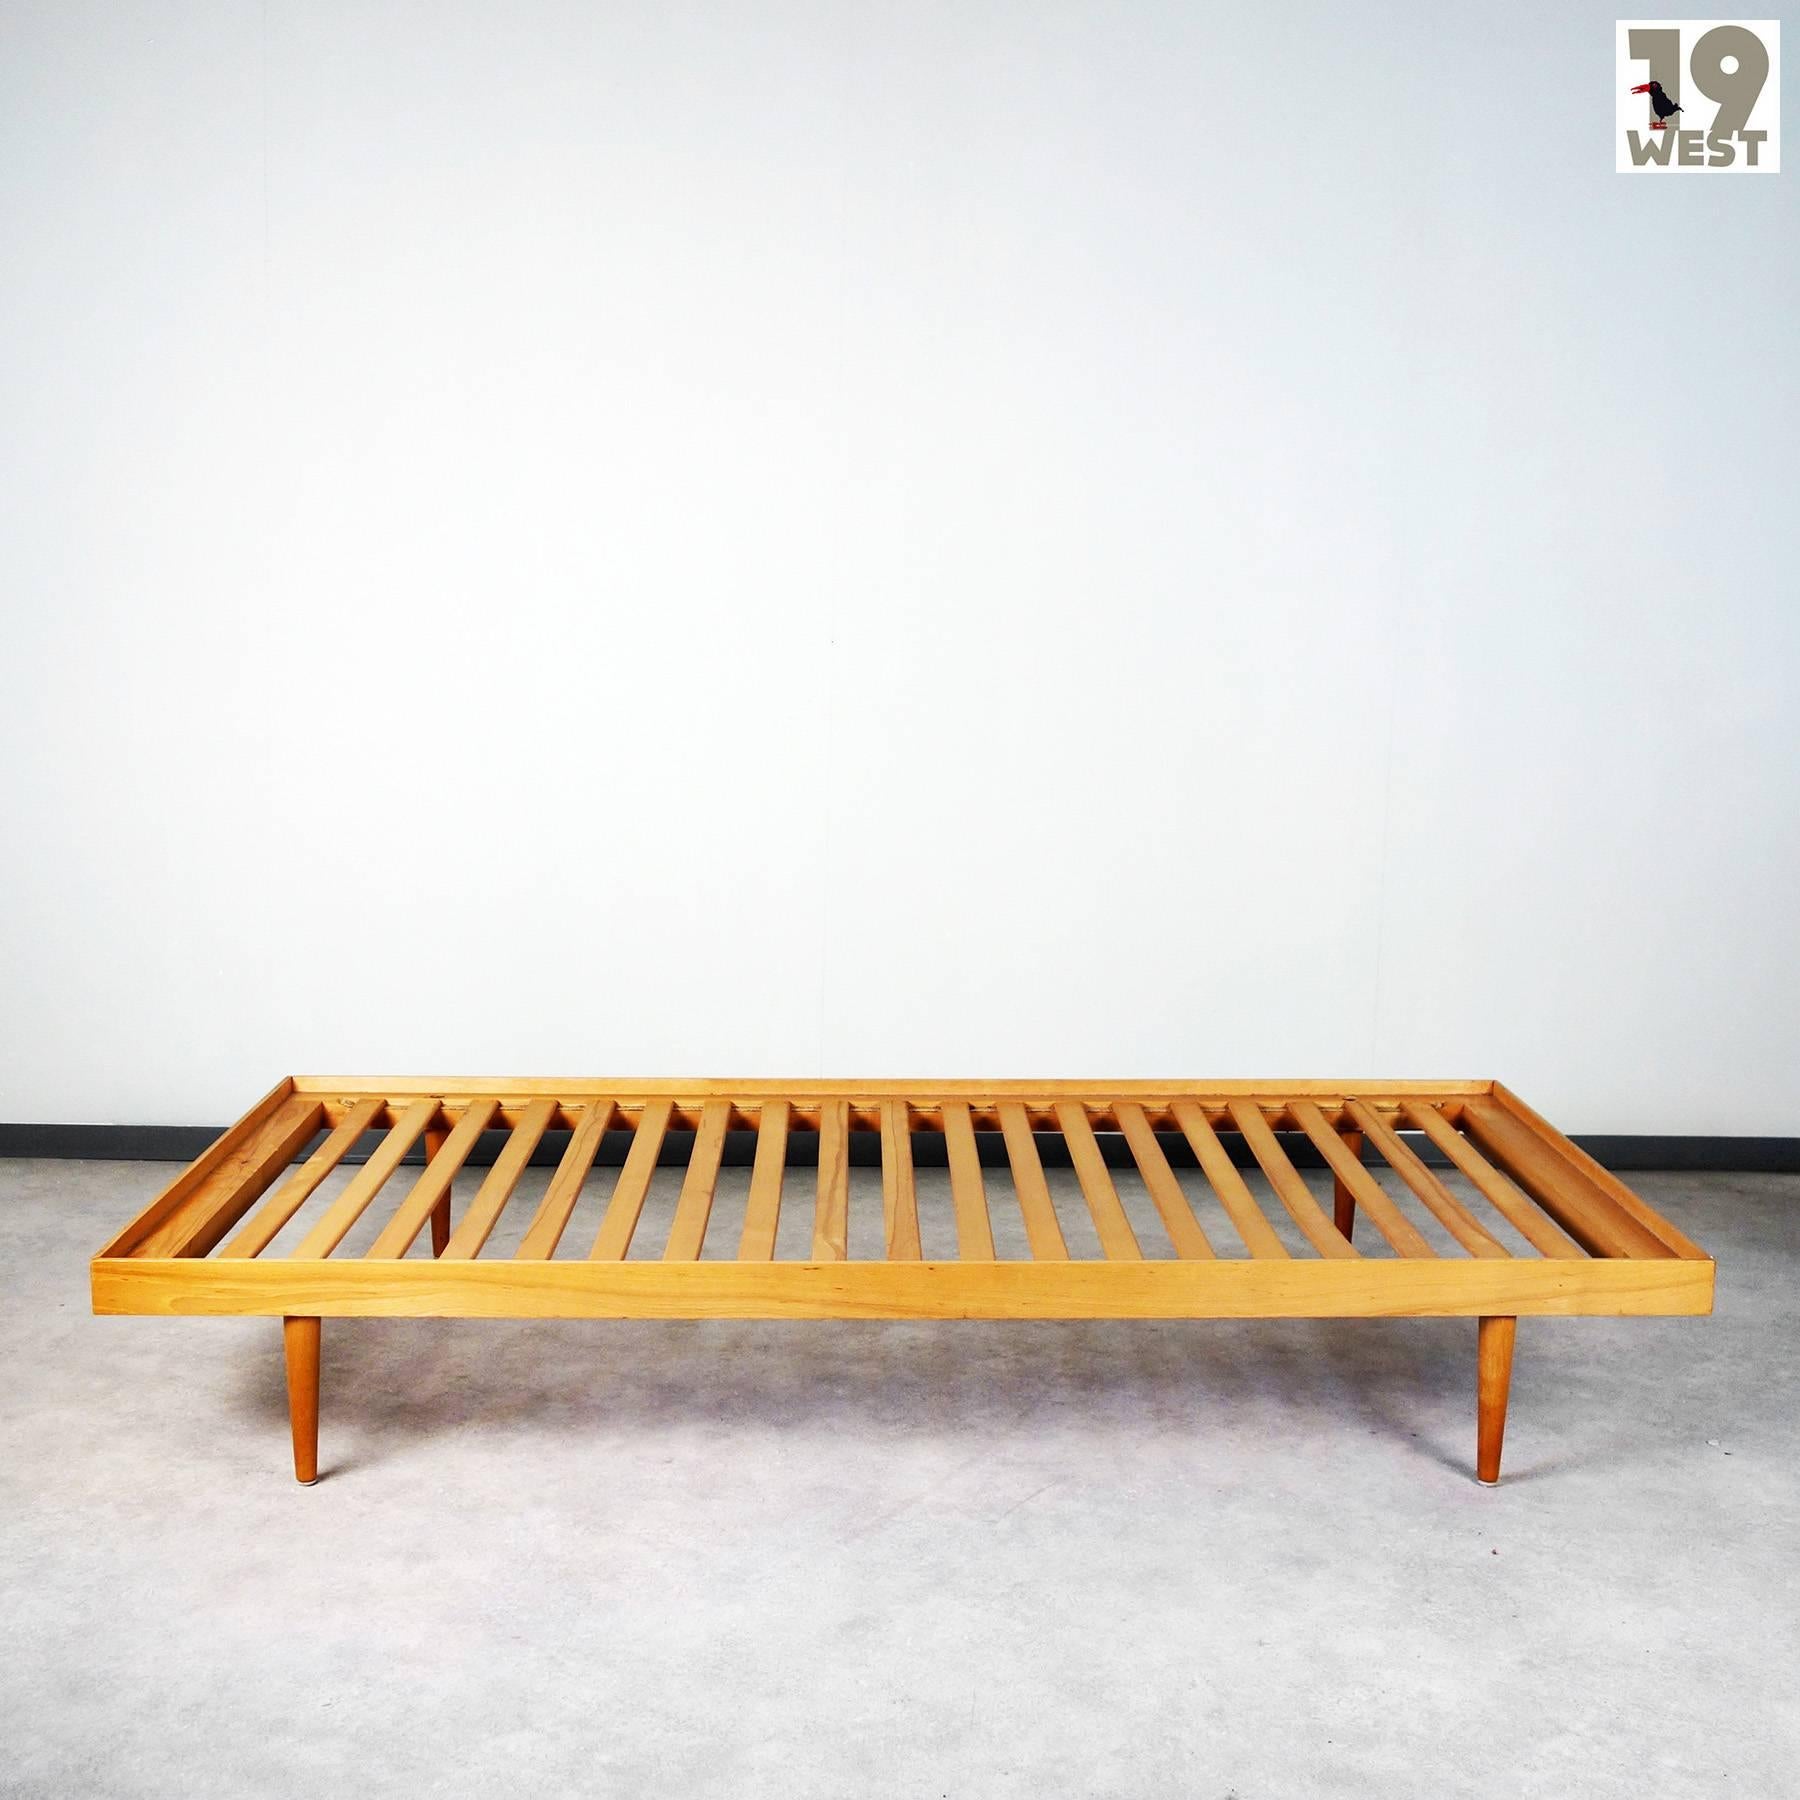 20th Century Minimalist Daybed from the 1950s